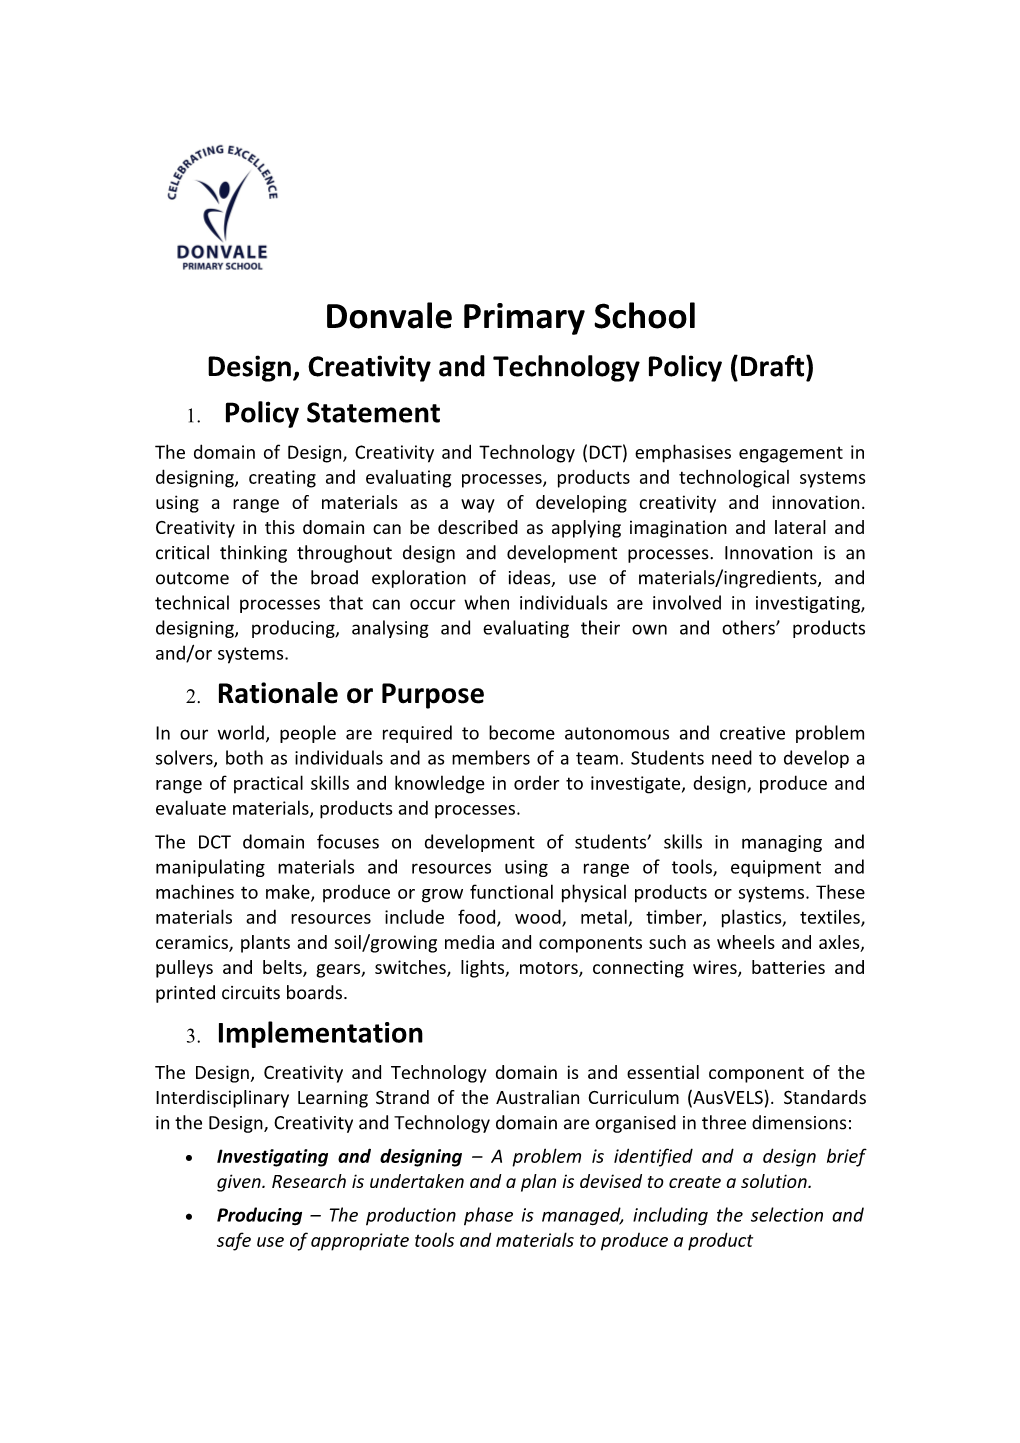 Design, Creativity and Technology Policy (Draft)